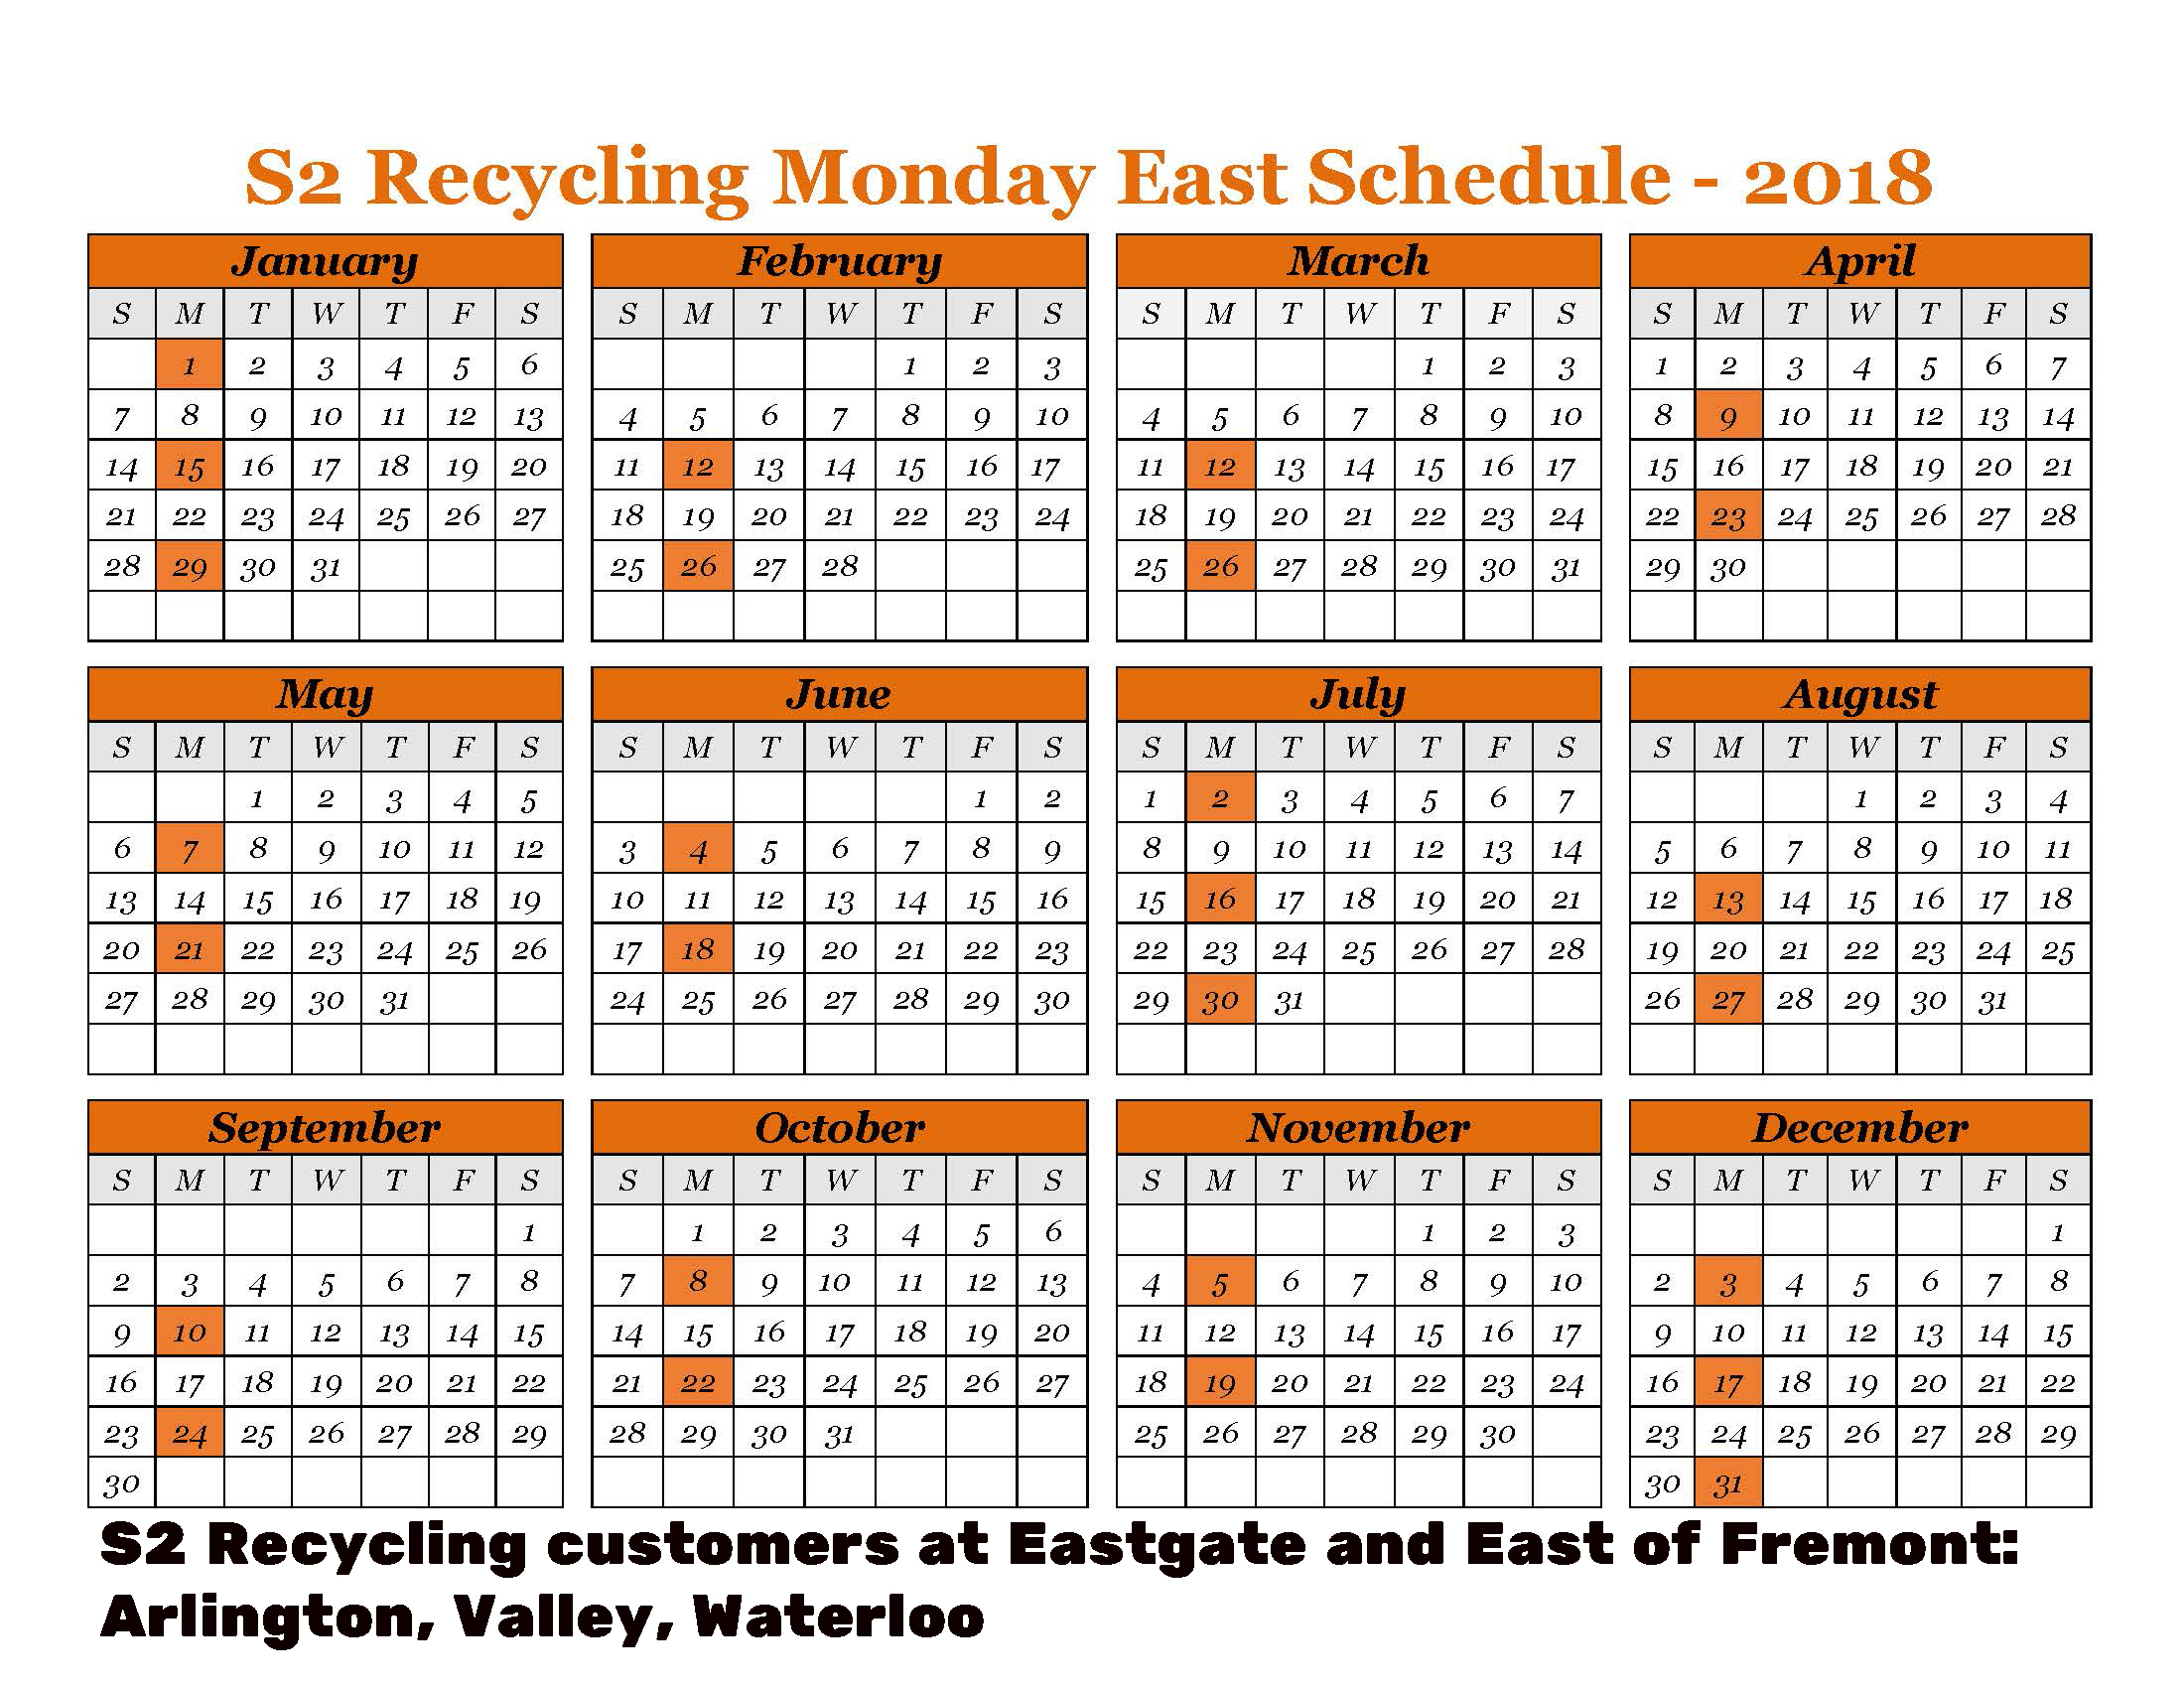 2018 Recycling Monday East Schudule